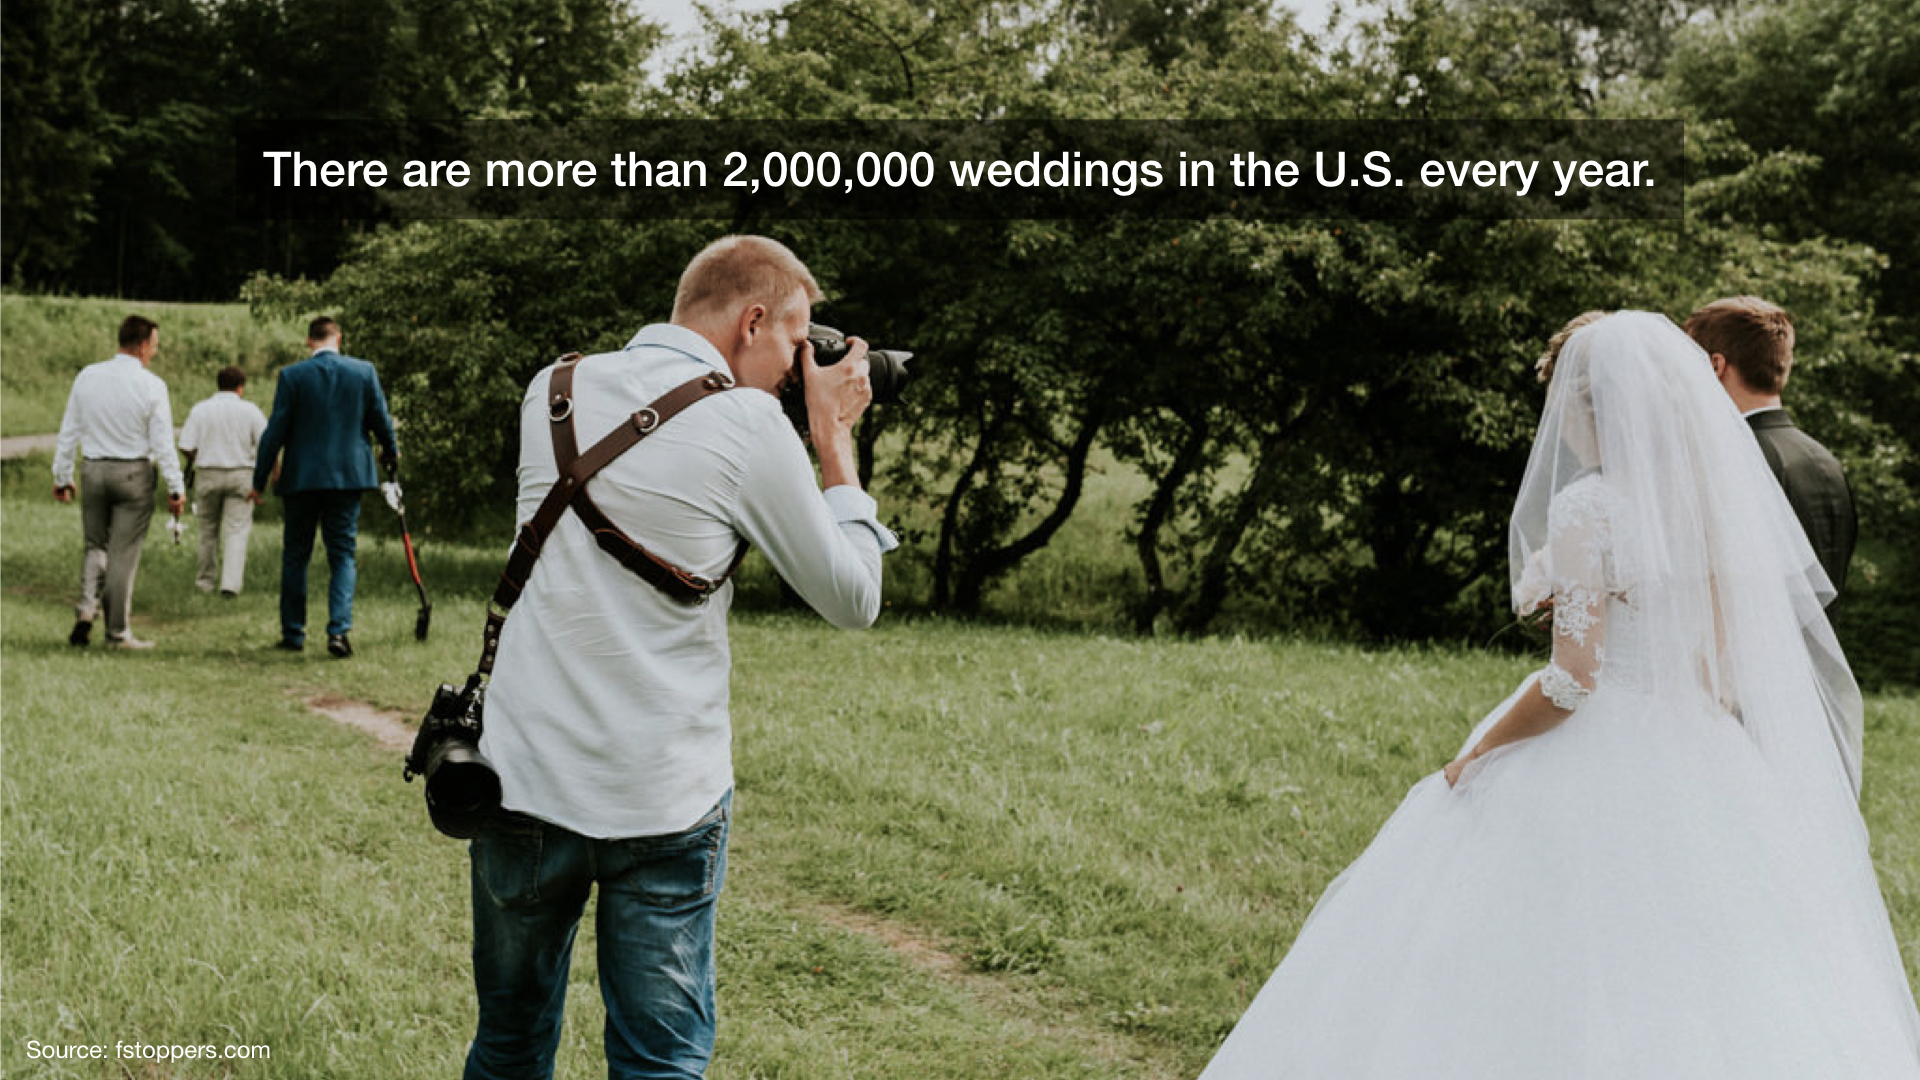  With more than 2 million weddings in the U.S. every year, hundreds of thousands of wedding photographers face the challenge of shooting and keeping track of the shots the clients want, especially while collaborating with other photographers… 